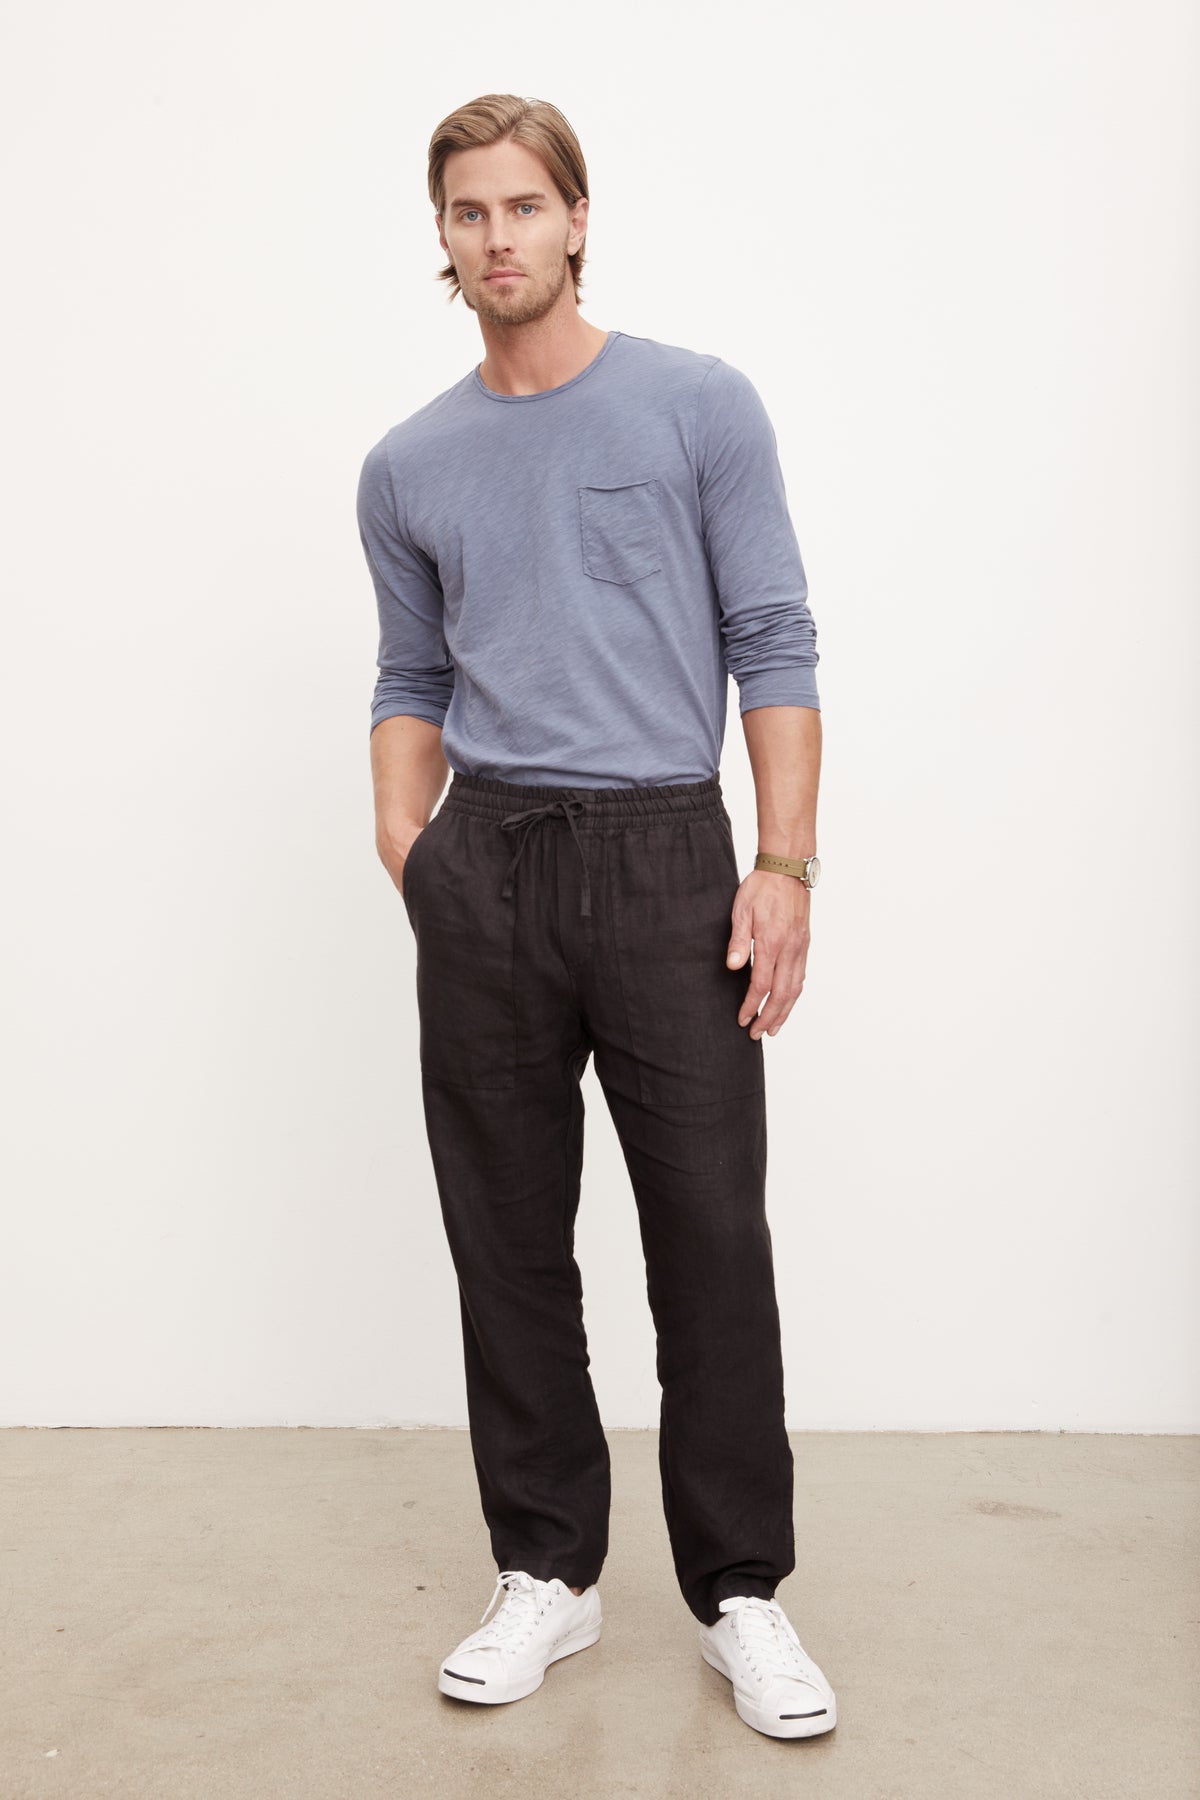   A man in a blue t-shirt and jeans is standing in front of a white wall wearing Velvet by Graham & Spencer's Phelan Linen Pant. 